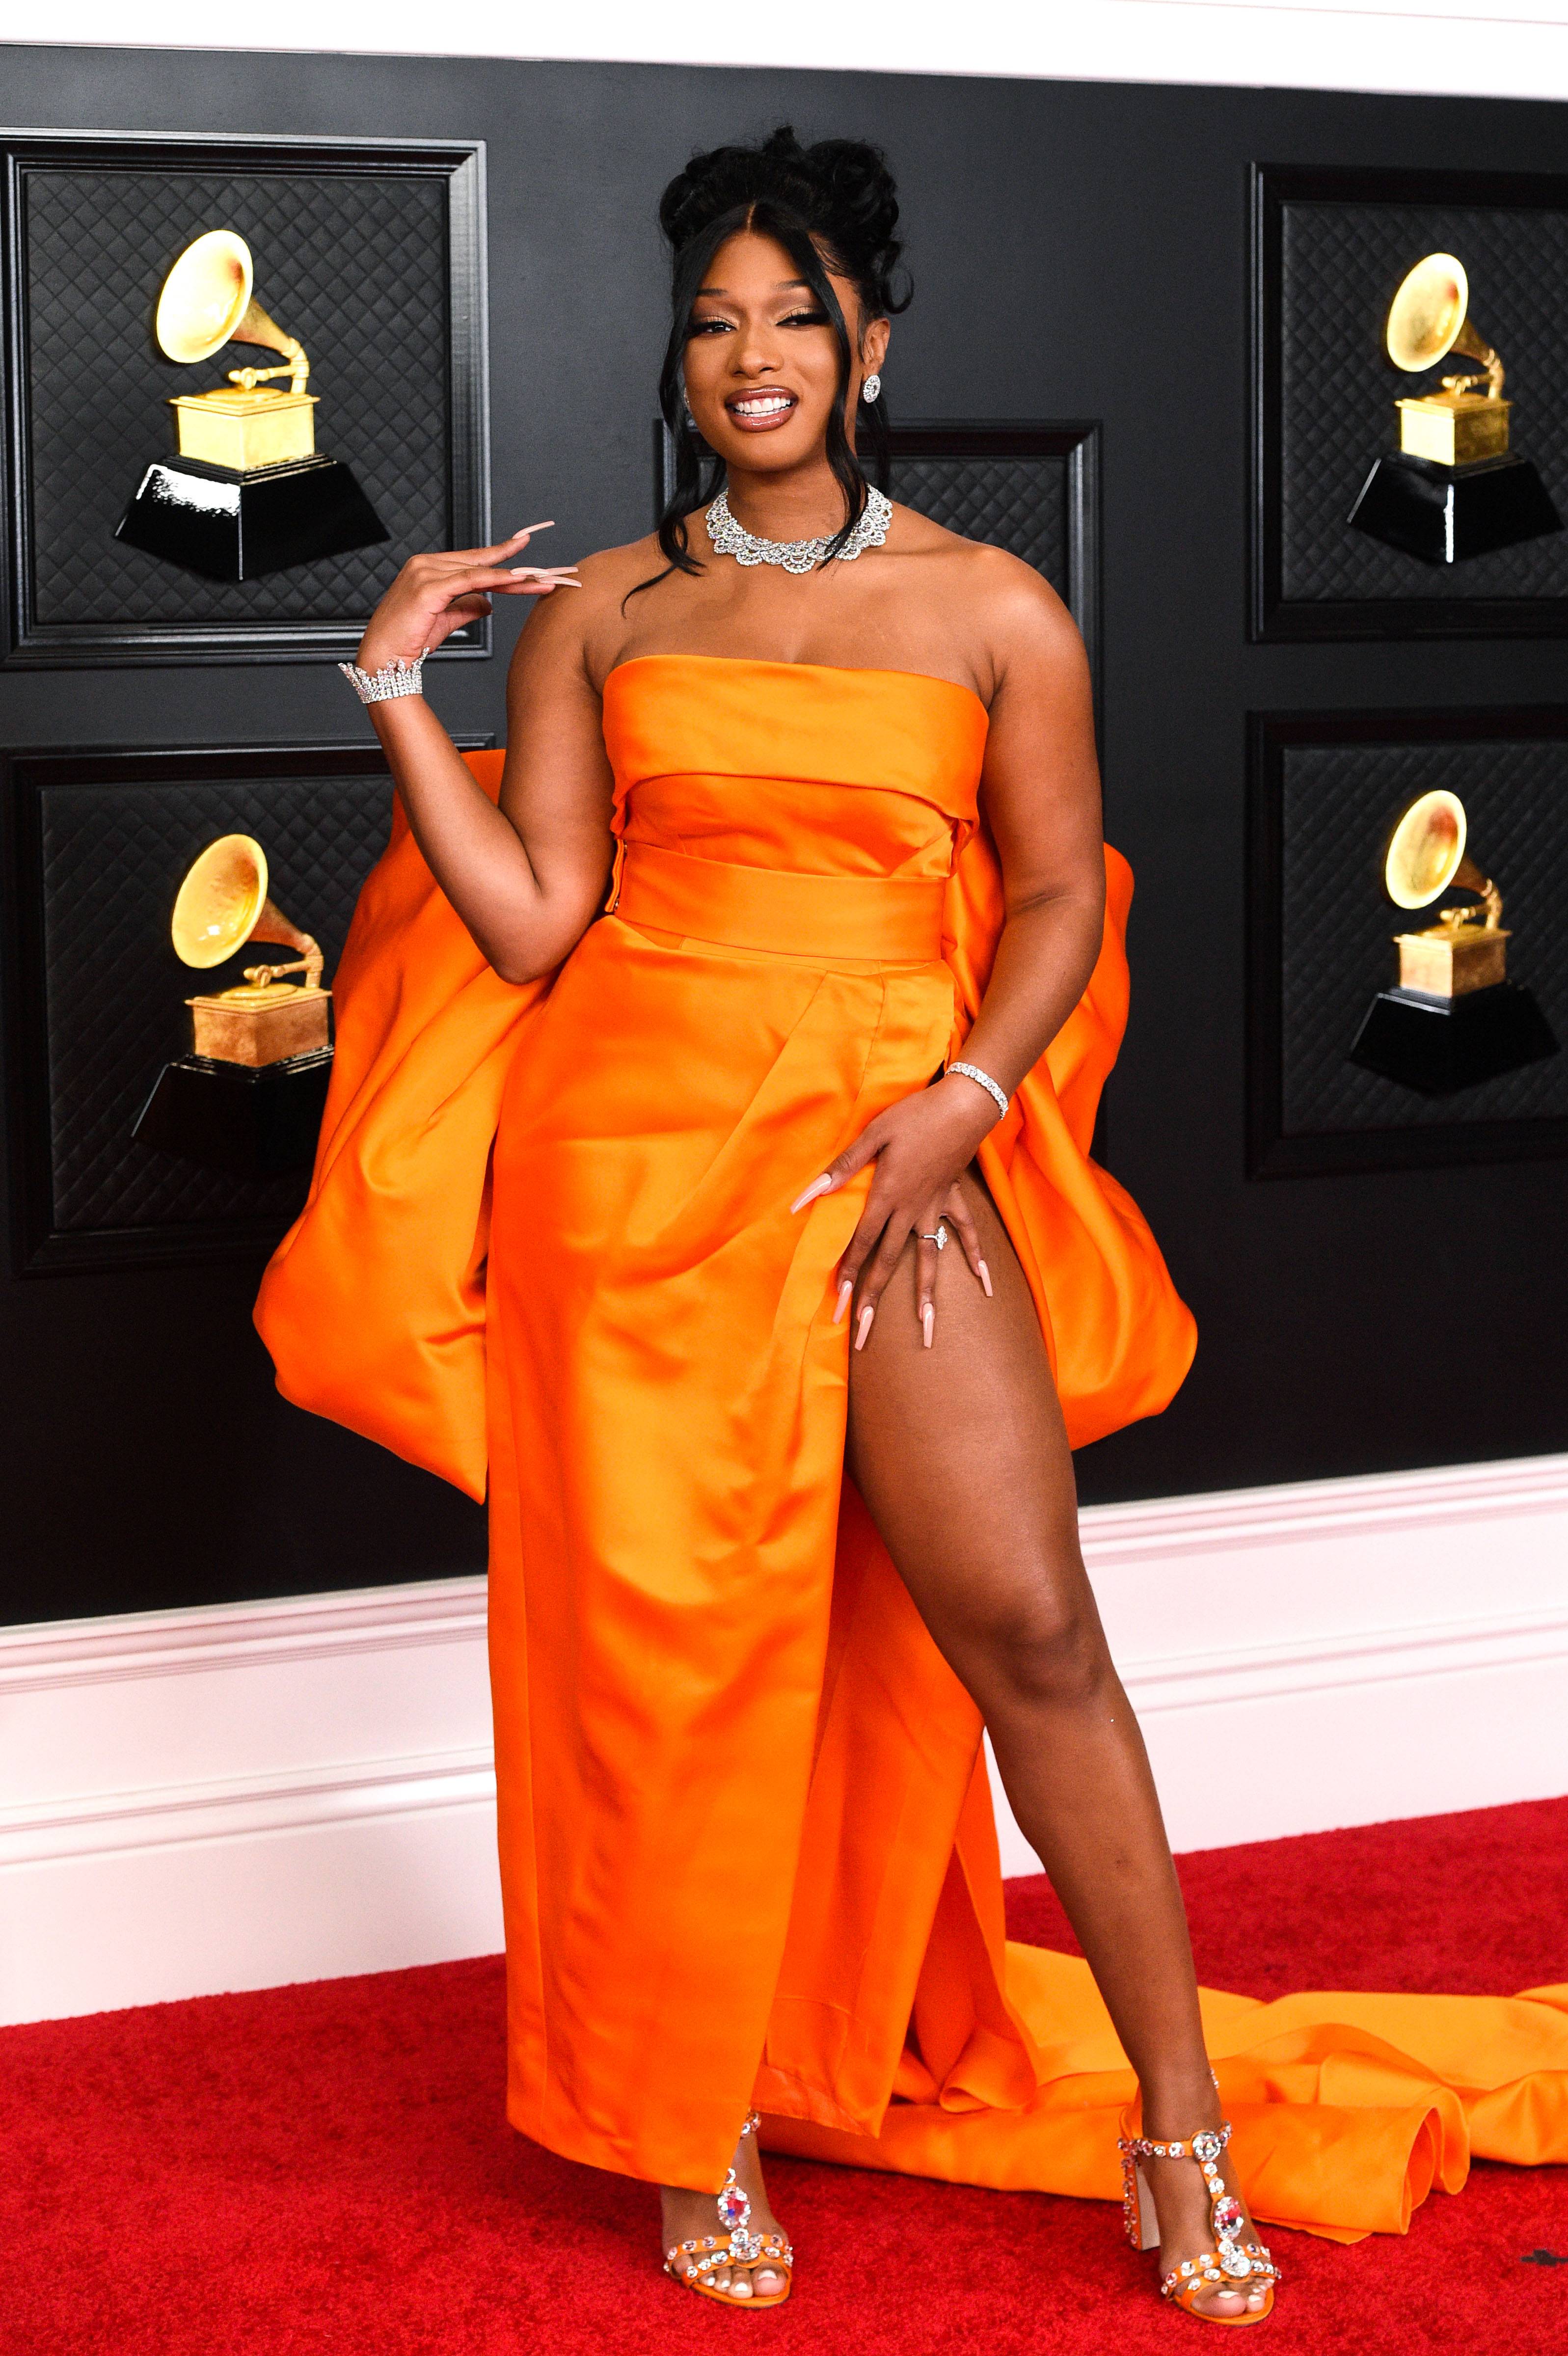 LOS ANGELES, CALIFORNIA - MARCH 14: Megan Thee Stallion attends the 63rd Annual GRAMMY Awards at Los Angeles Convention Center on March 14, 2021 in Los Angeles, California. (Photo by Kevin Mazur/Getty Images for The Recording Academy )